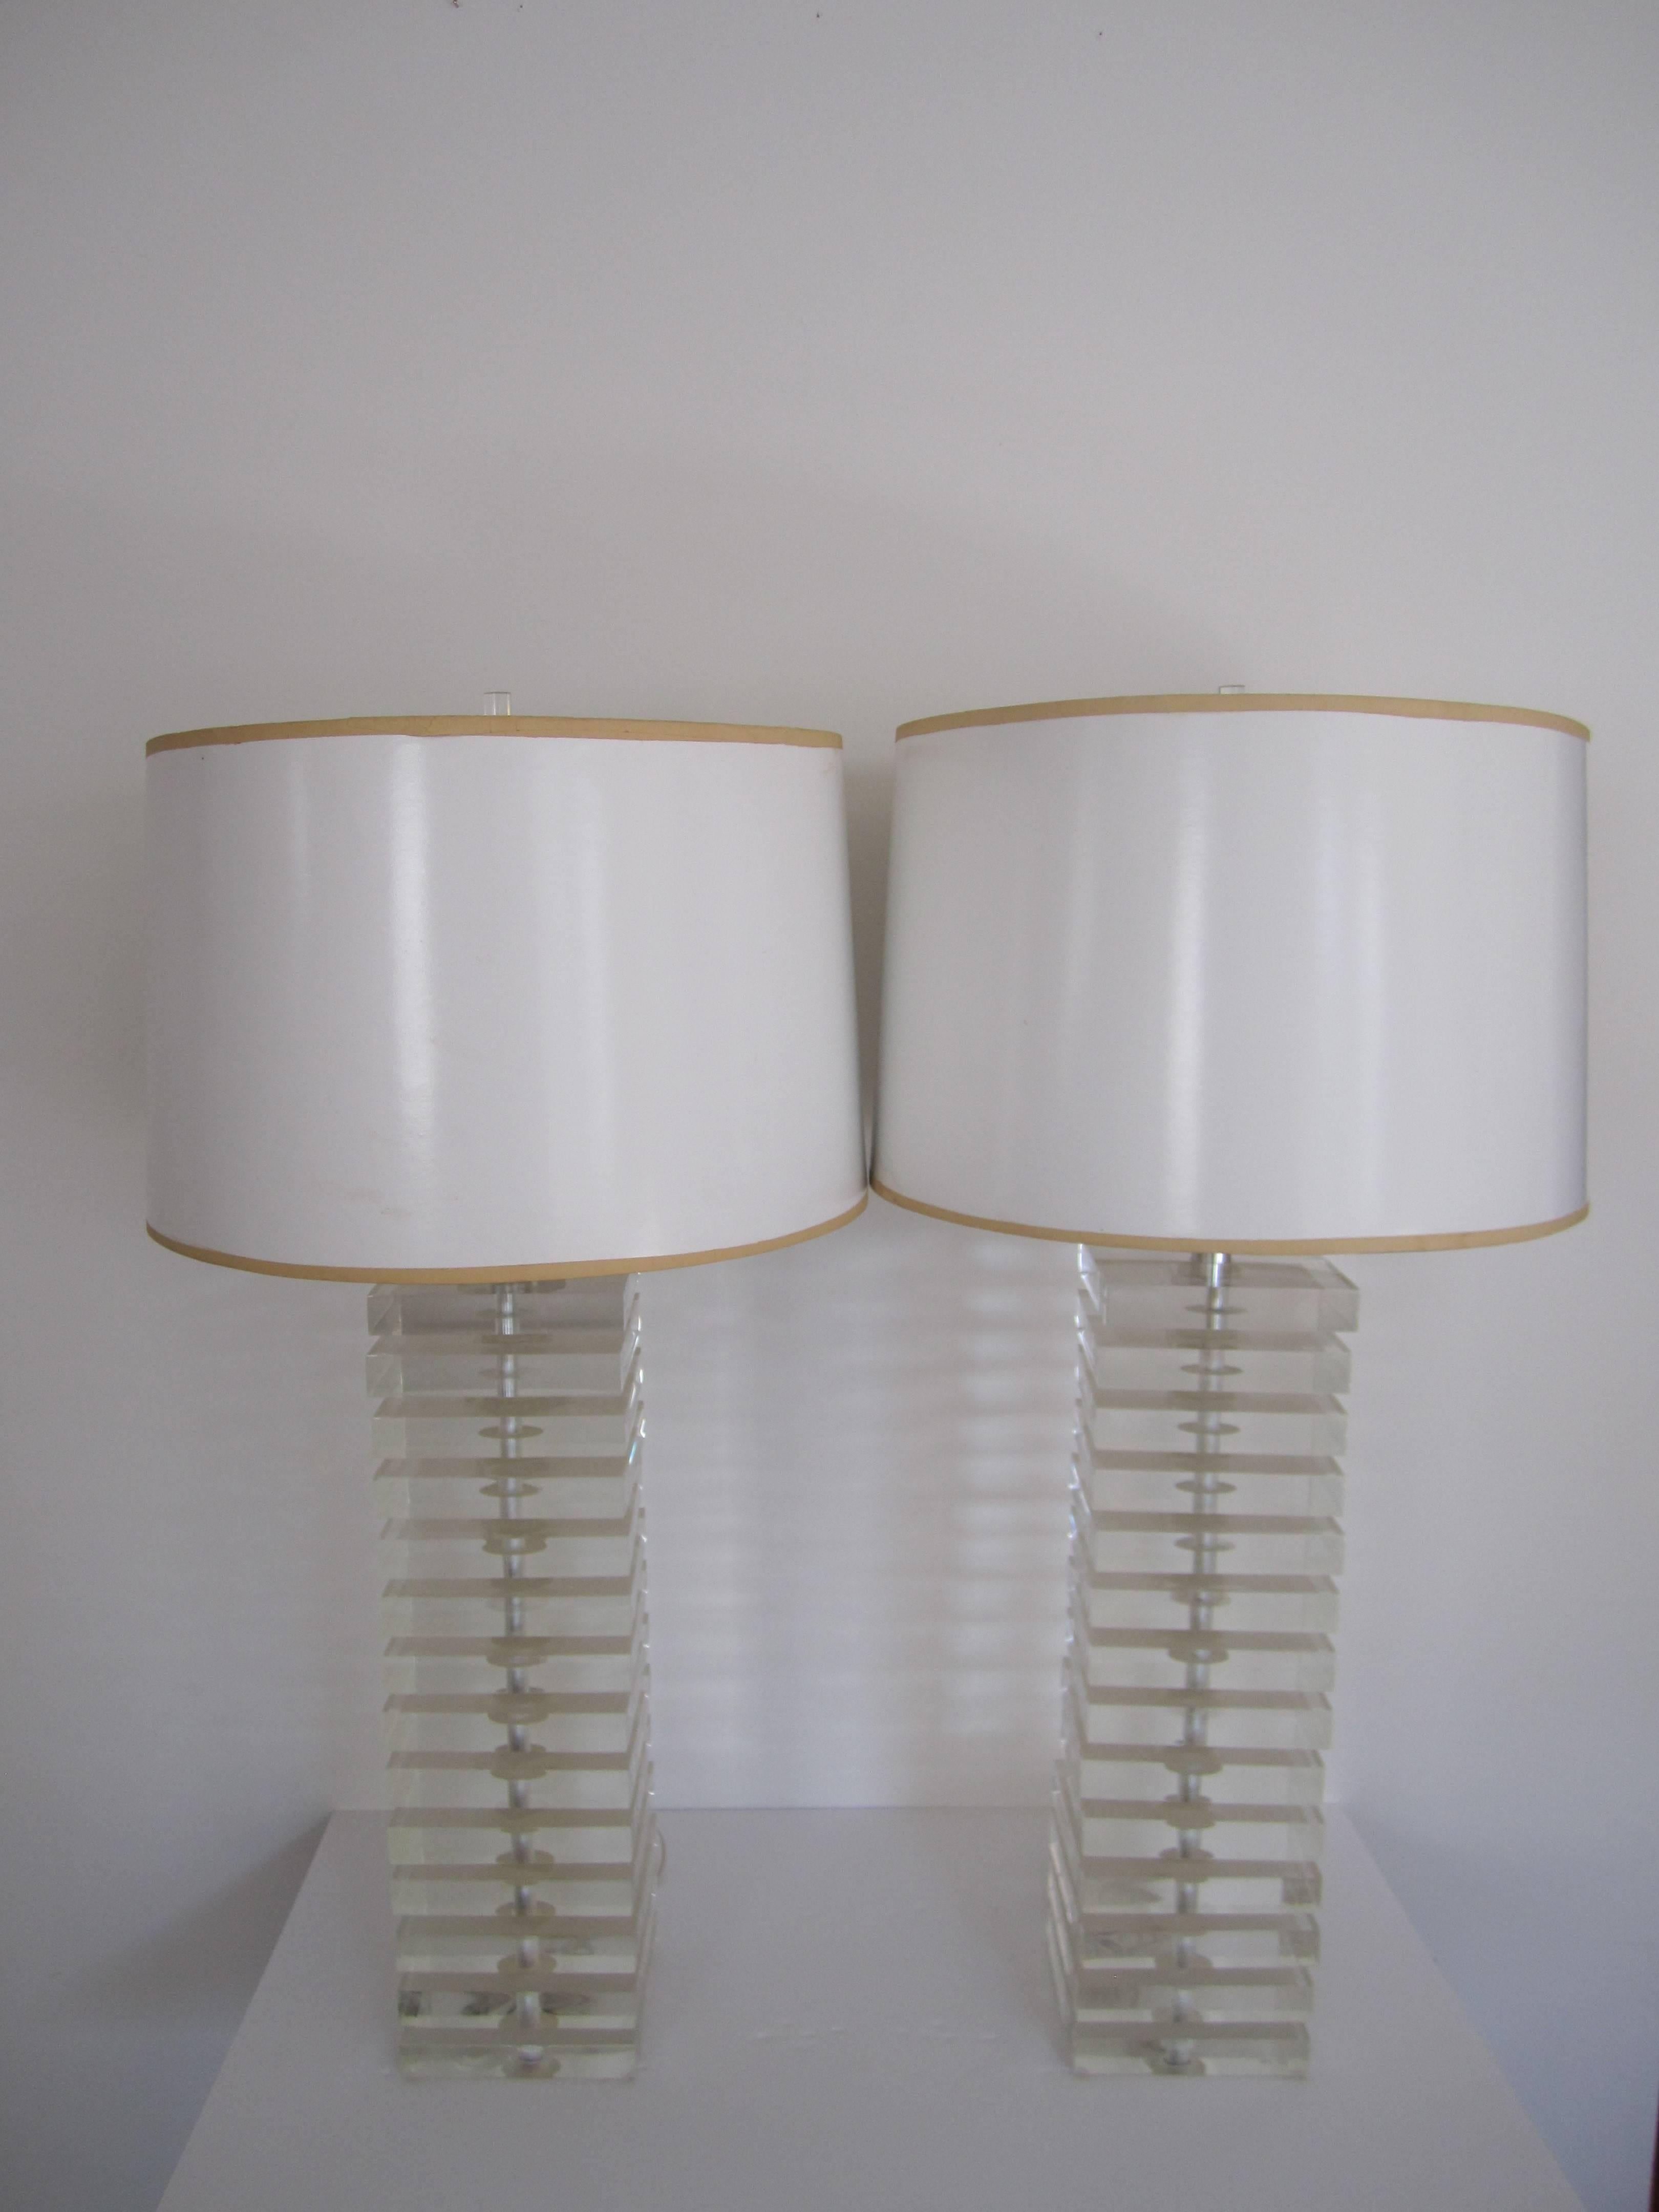 A pair of tall, substantial, Modern style or Postmodern period Lucite table lamps with Lucite finials, by designer George Bullitt, circa 1980s- 1990s. Lamps are marked on socket with designer label (image #12.) In working order. 

Measurements